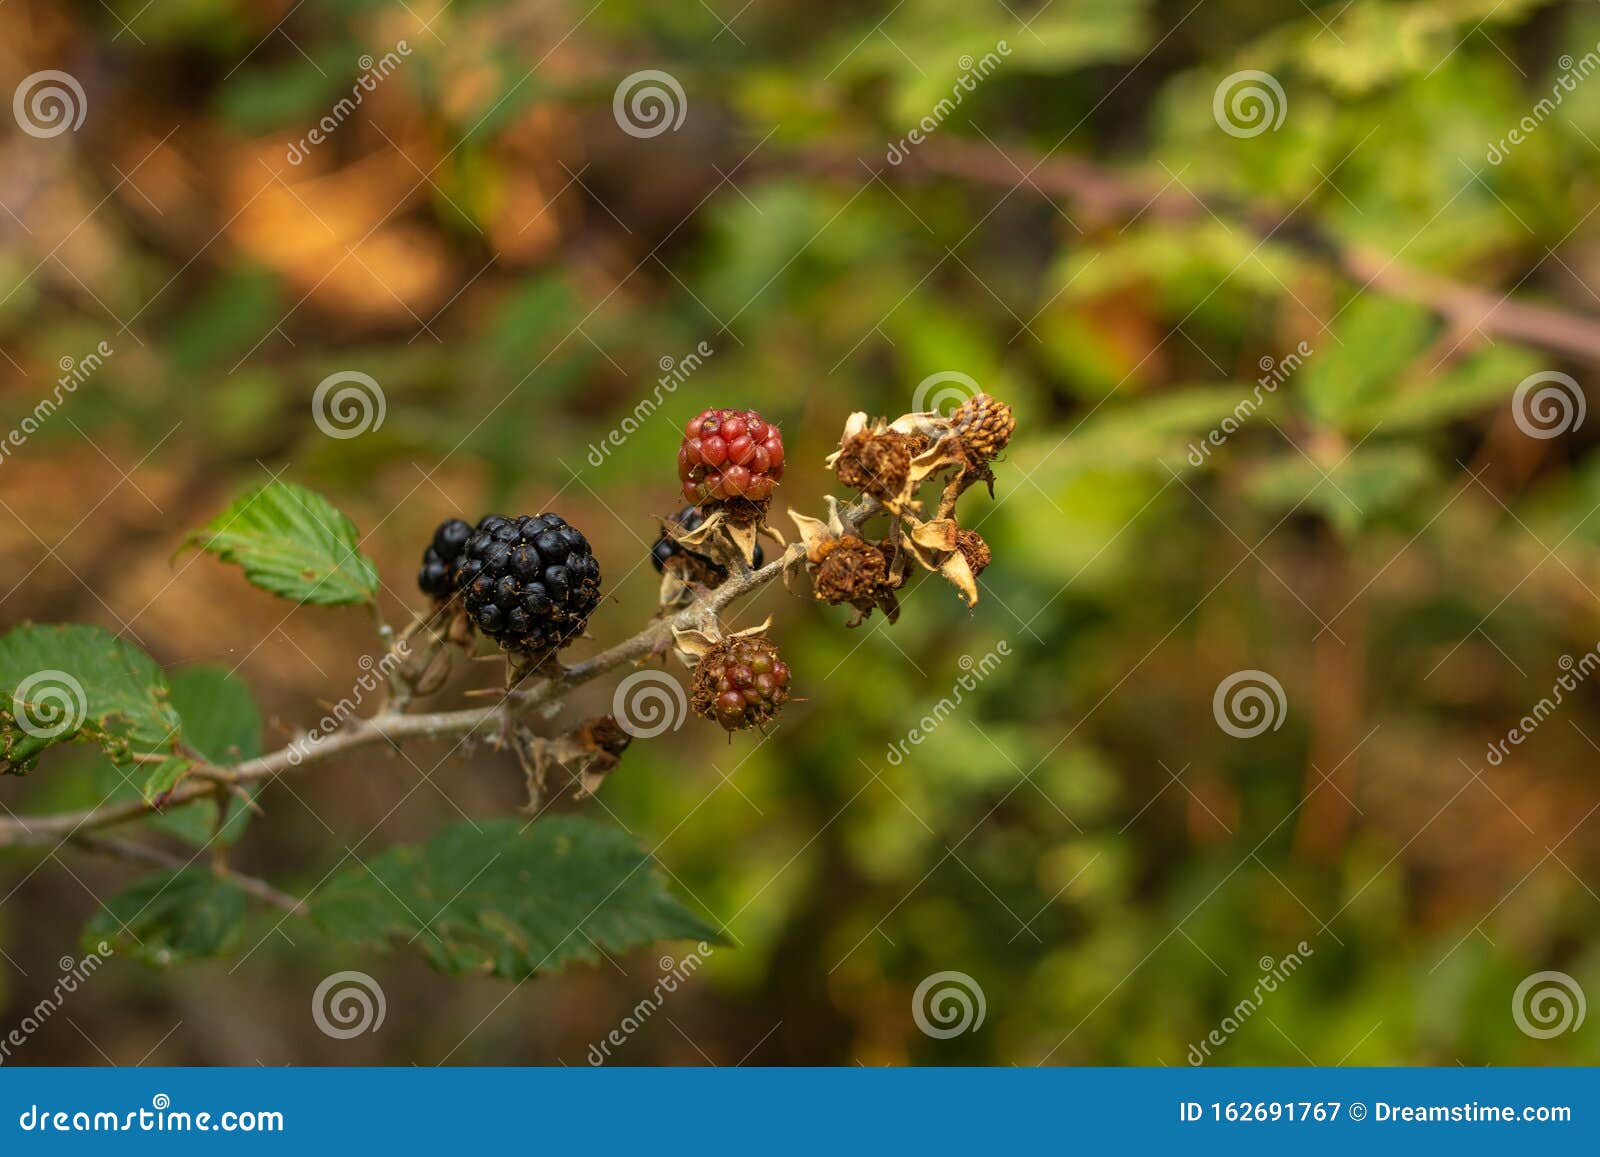 blackberries with green background